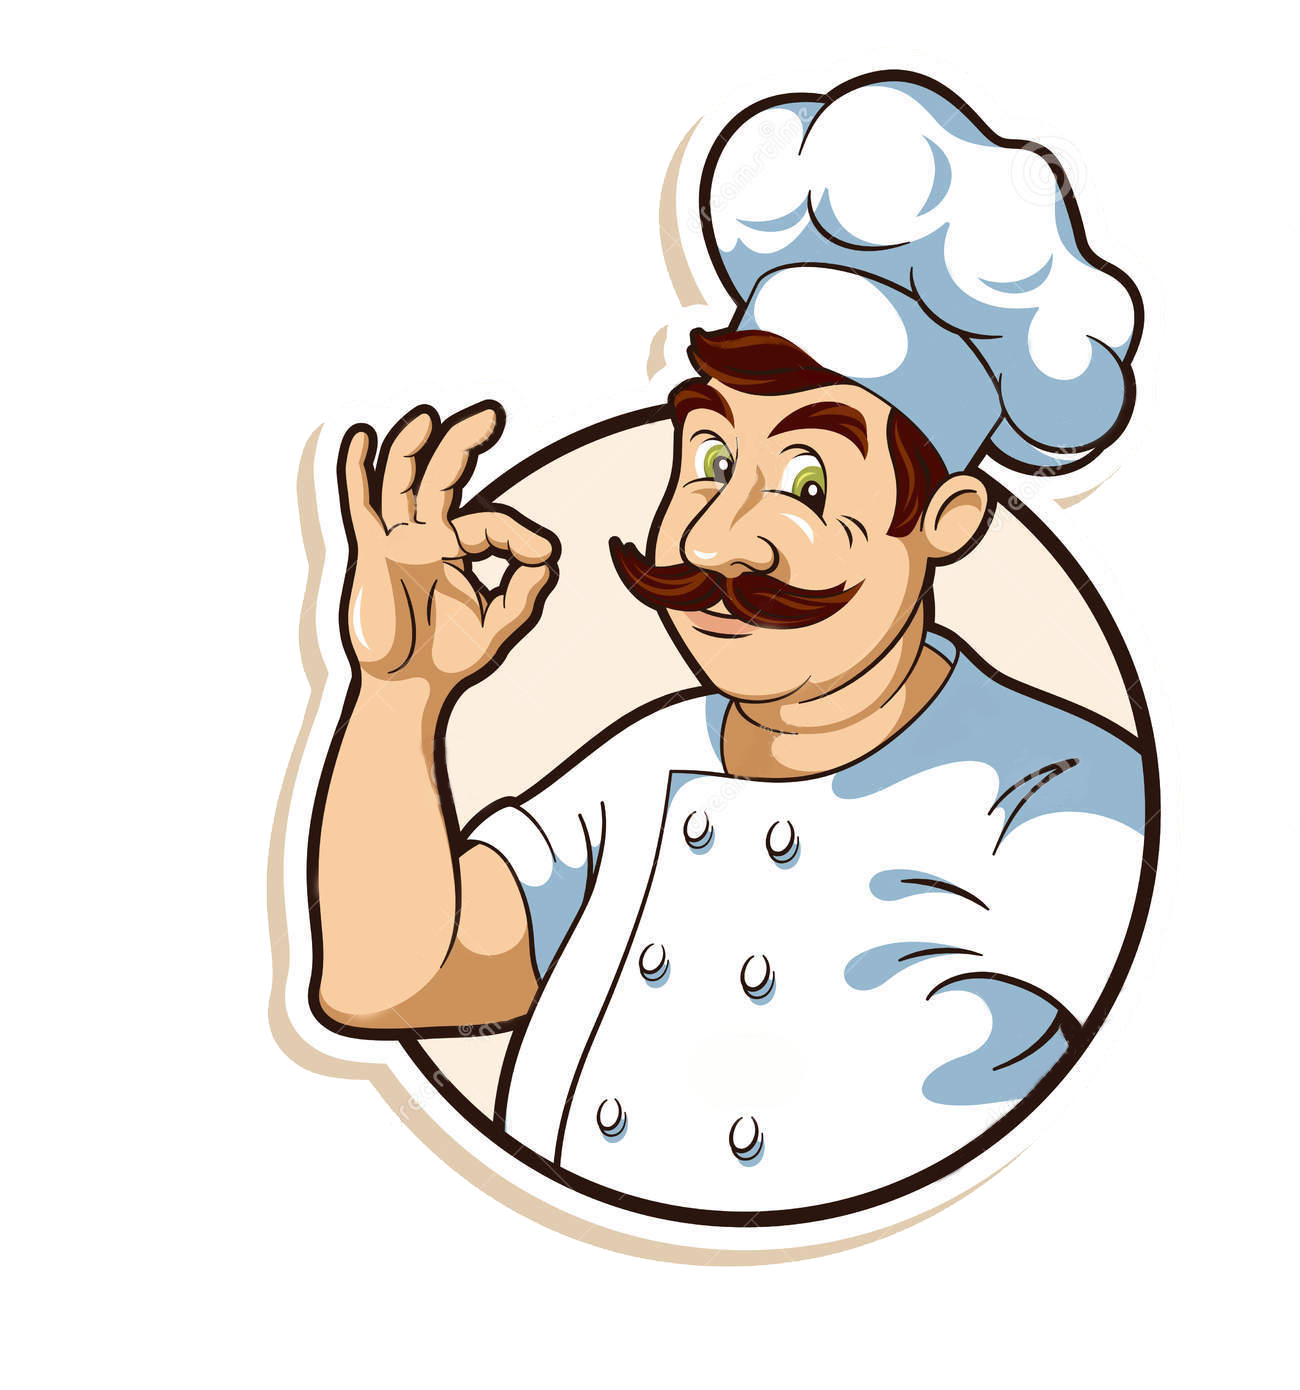 Chef PNG, Cartoon Chef, Chef Hat, Woman Chef Free Download - Free  Transparent PNG Logos